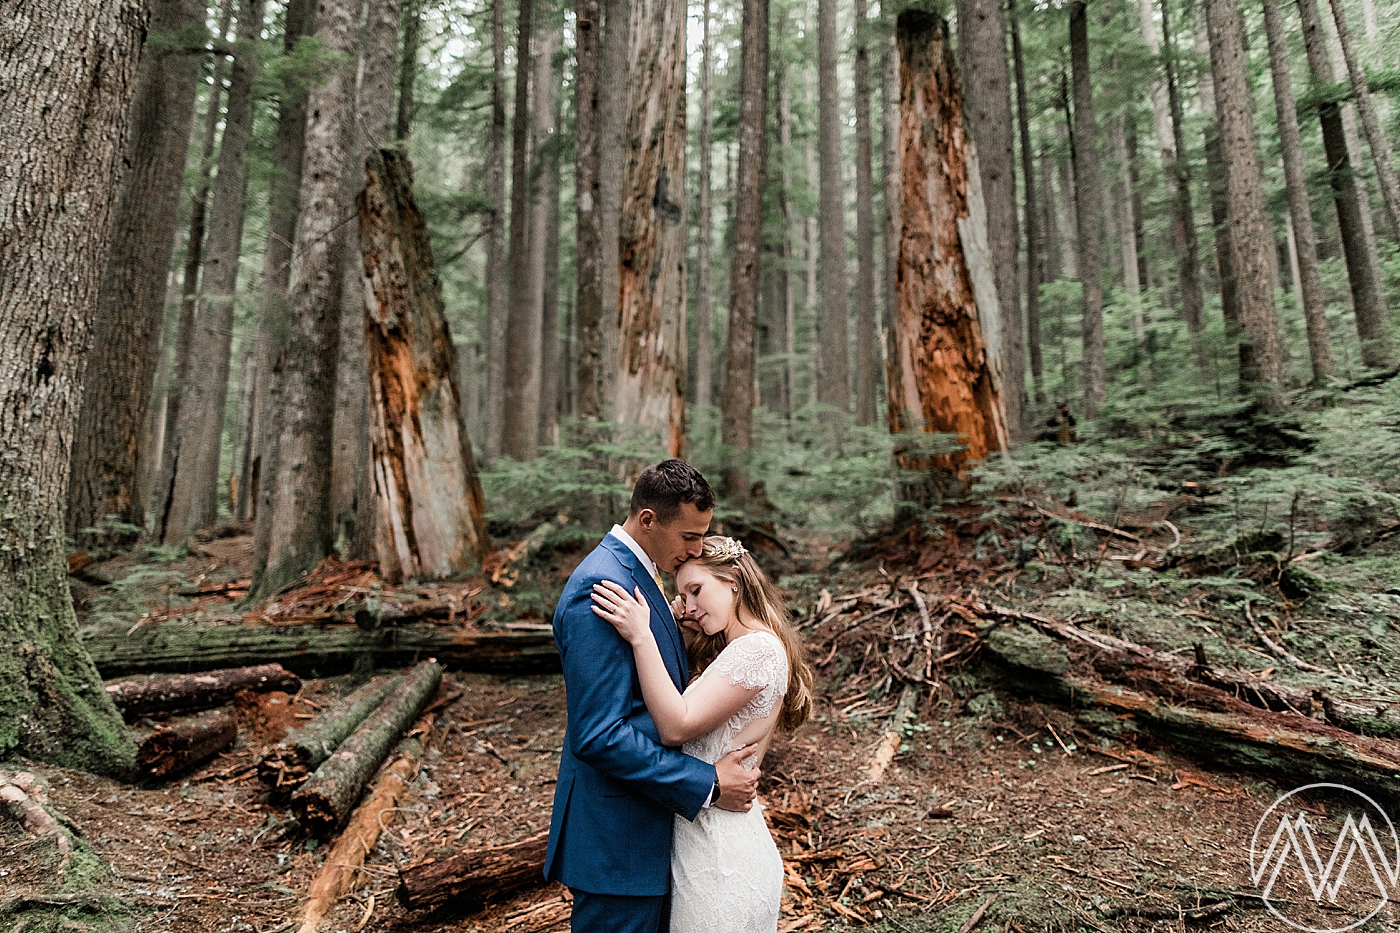 Bride and groom first dance outside at Mt. Rainier elopement | Megan Montalvo Photography